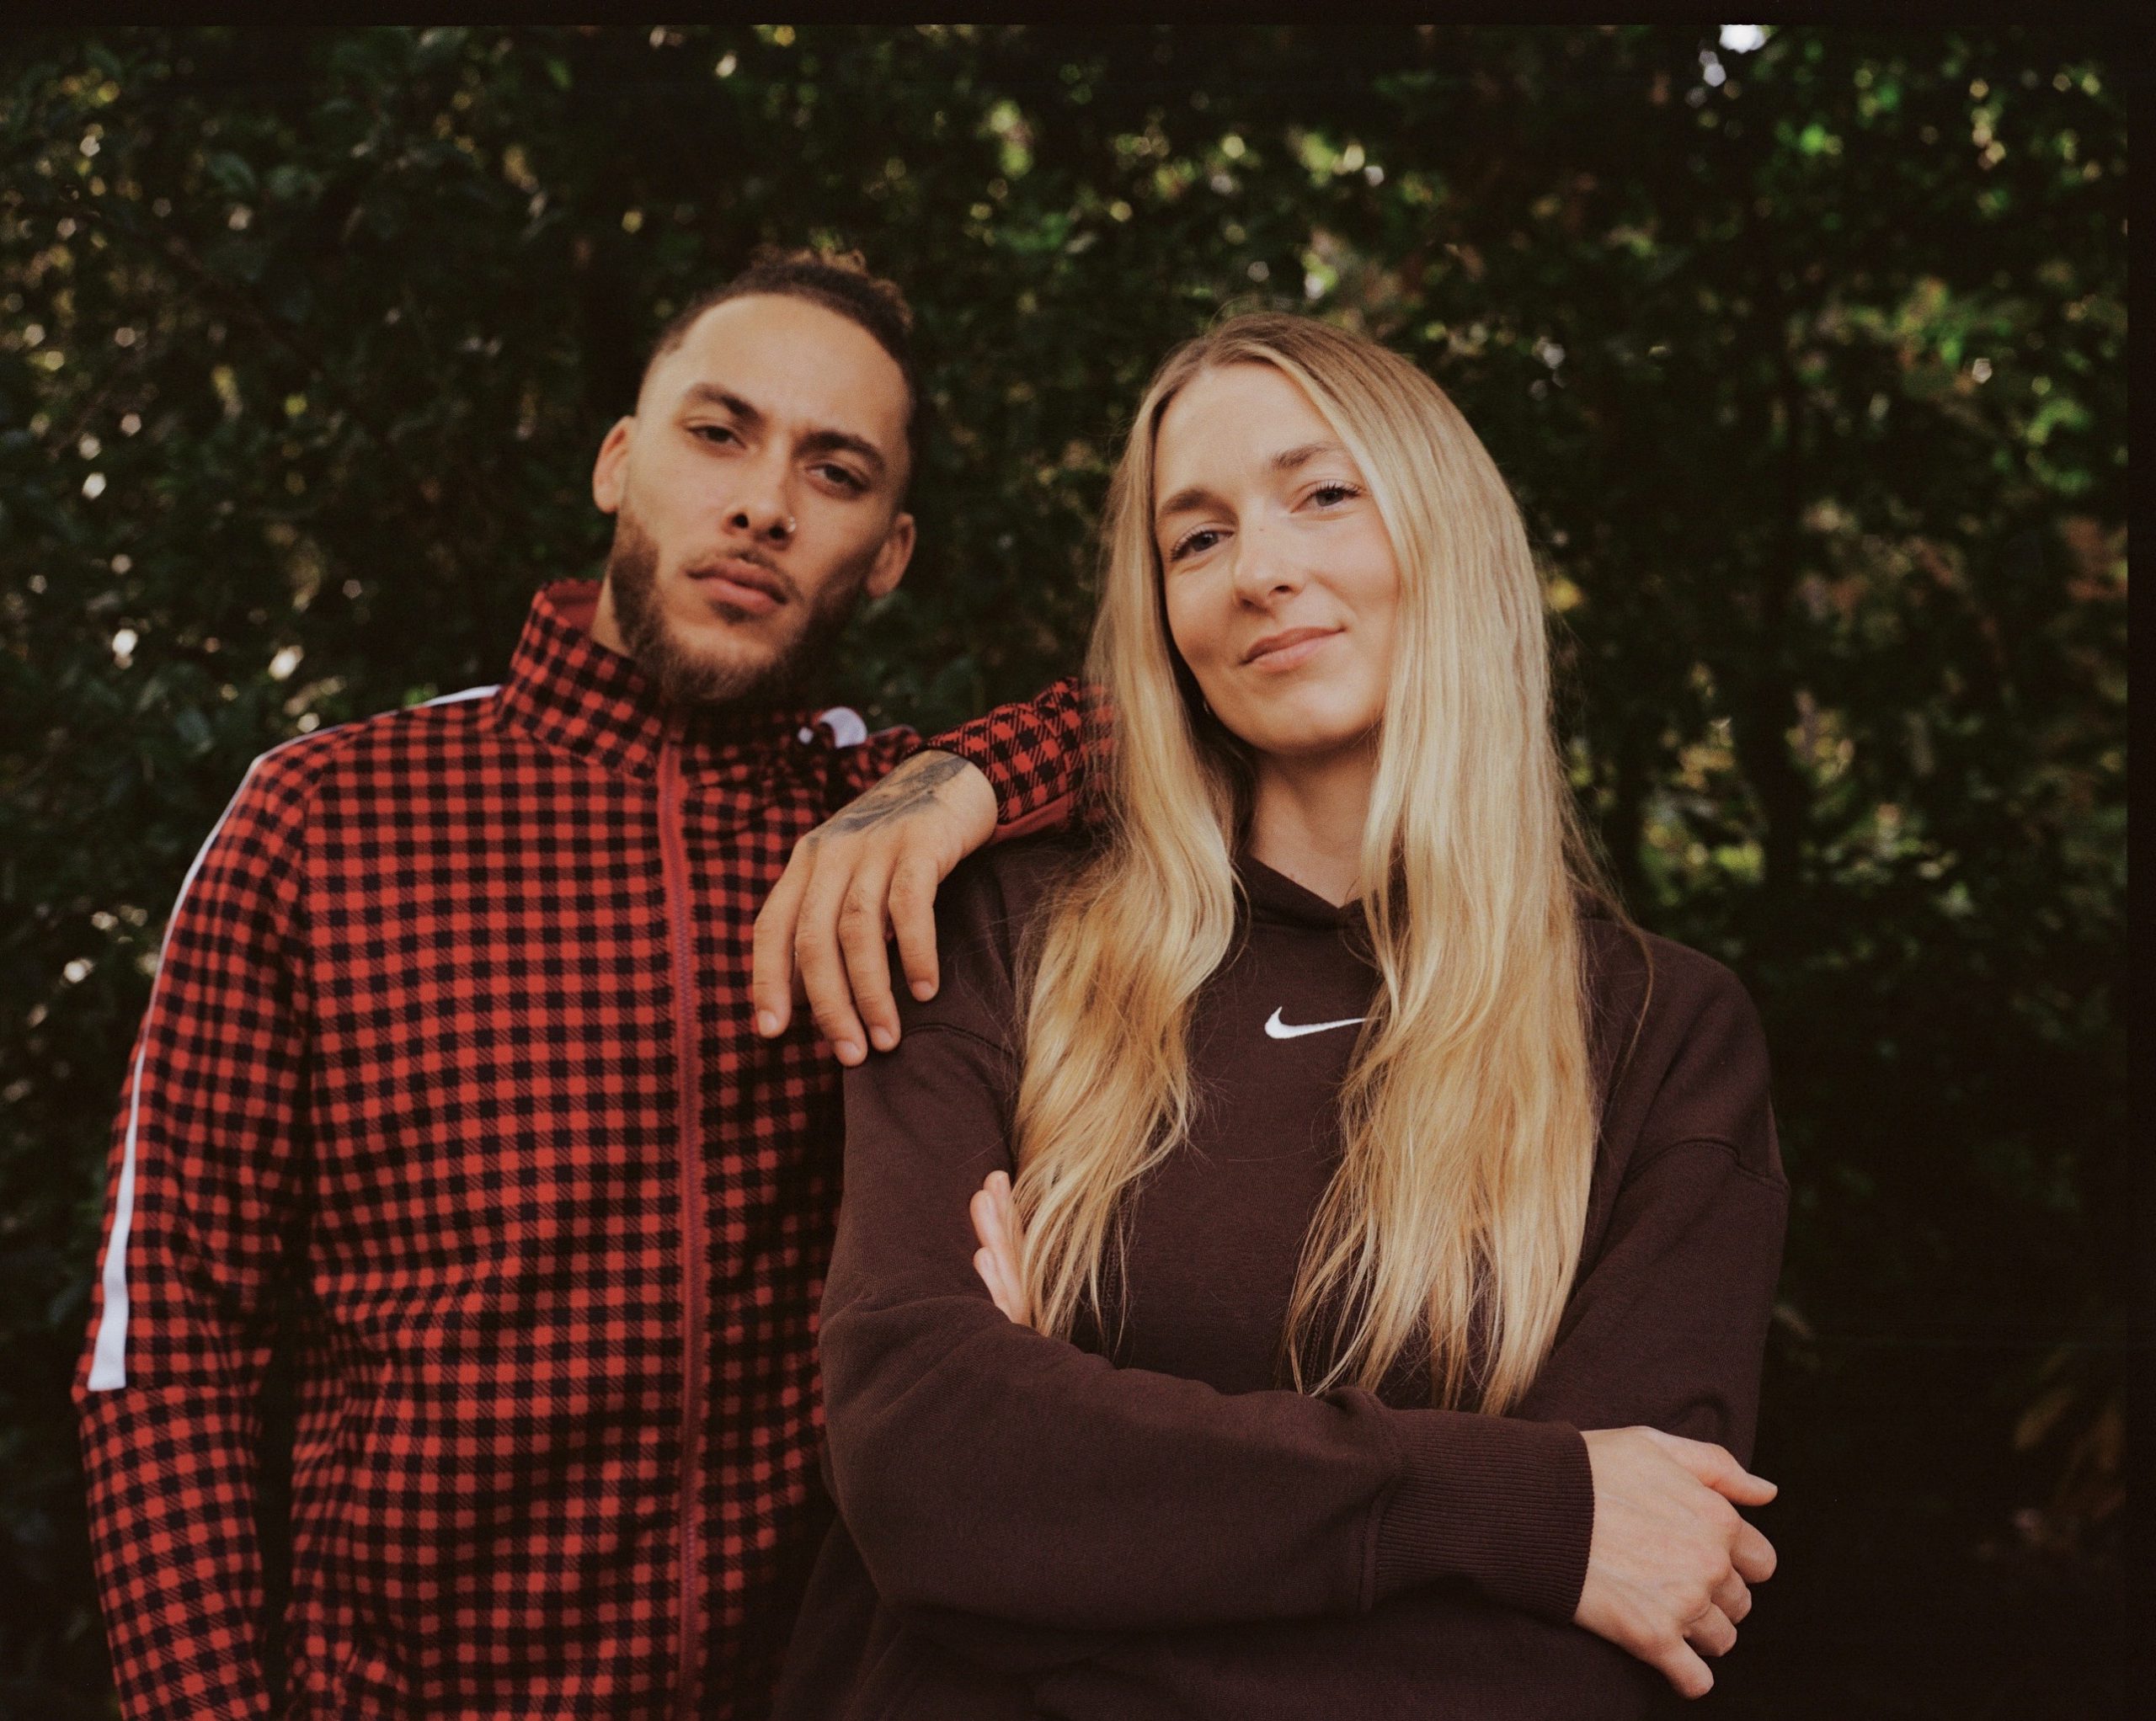 Marie Dahlstrom drops R&B mixed with neo-soul single “Clouds” full of positivity featuring Delleile Ankrah